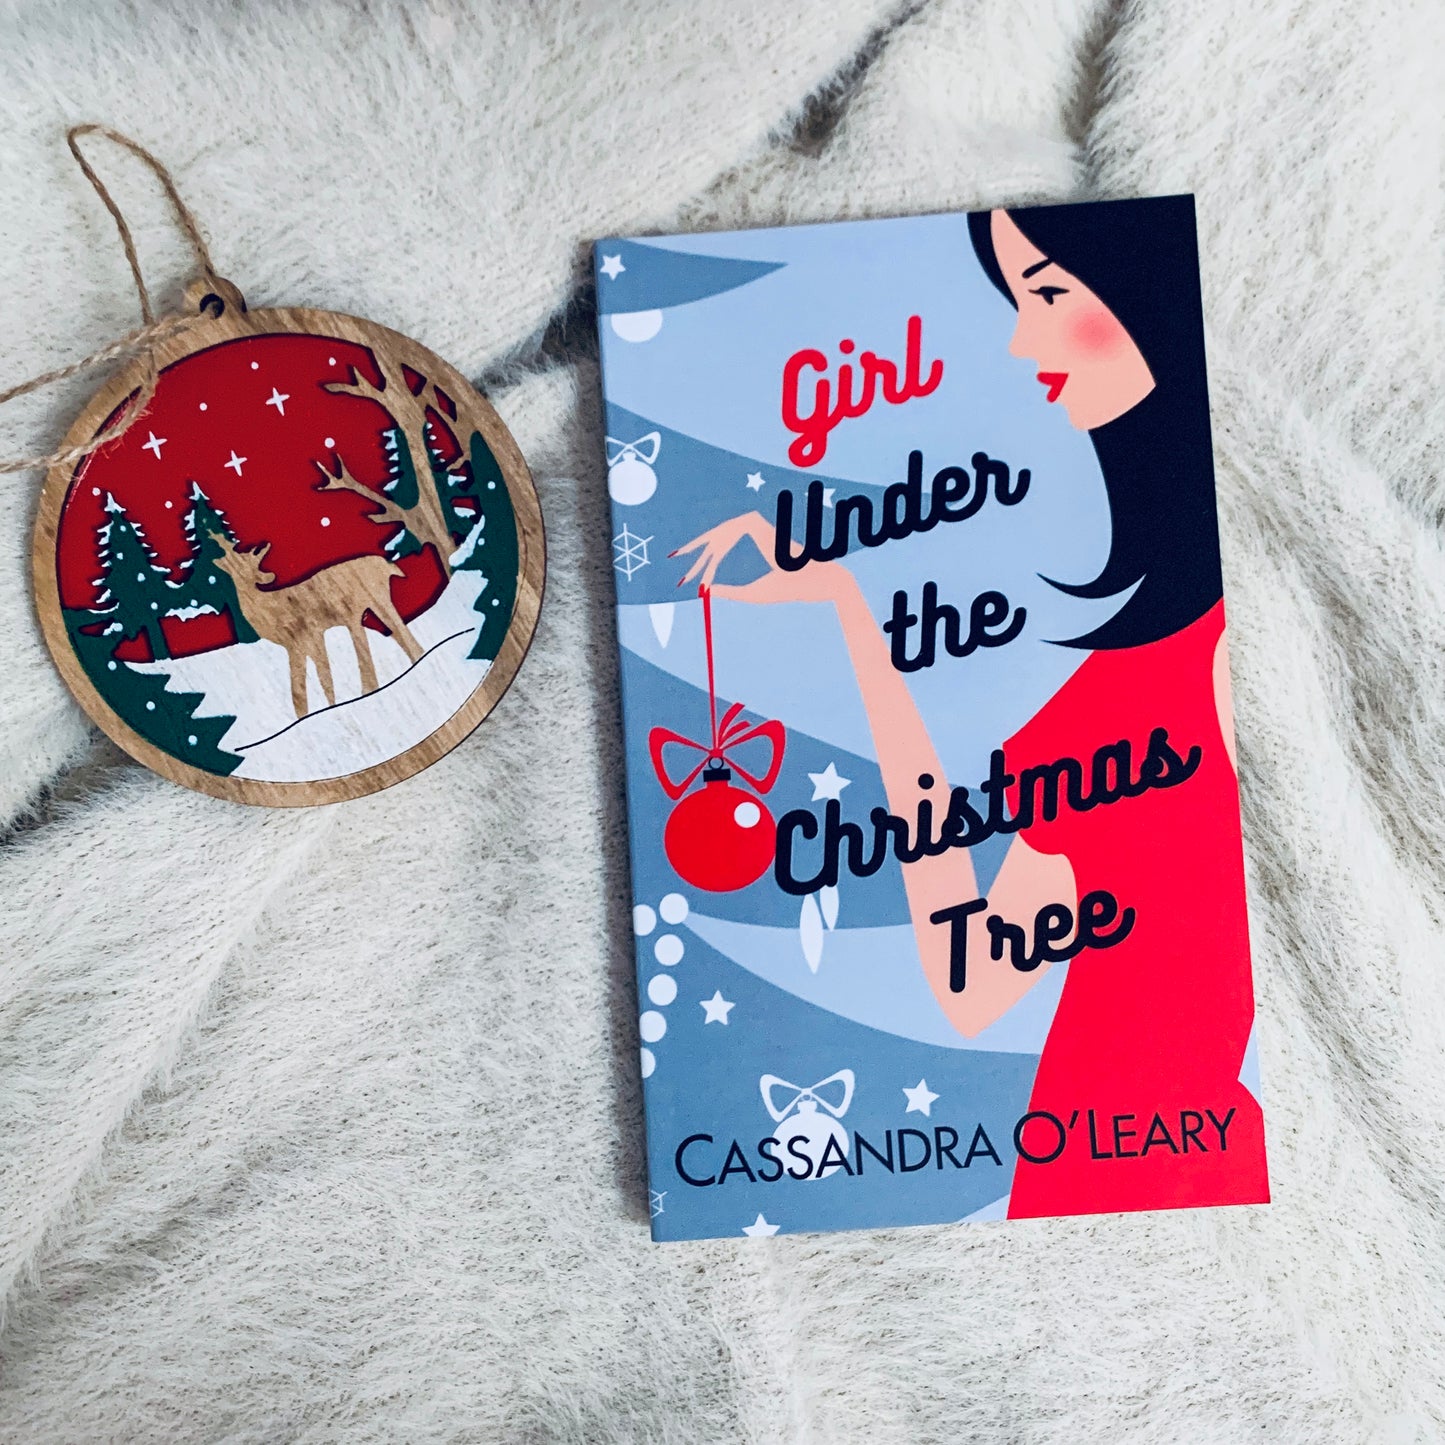 Girl Under the Christmas Tree by Cassandra O’Leary